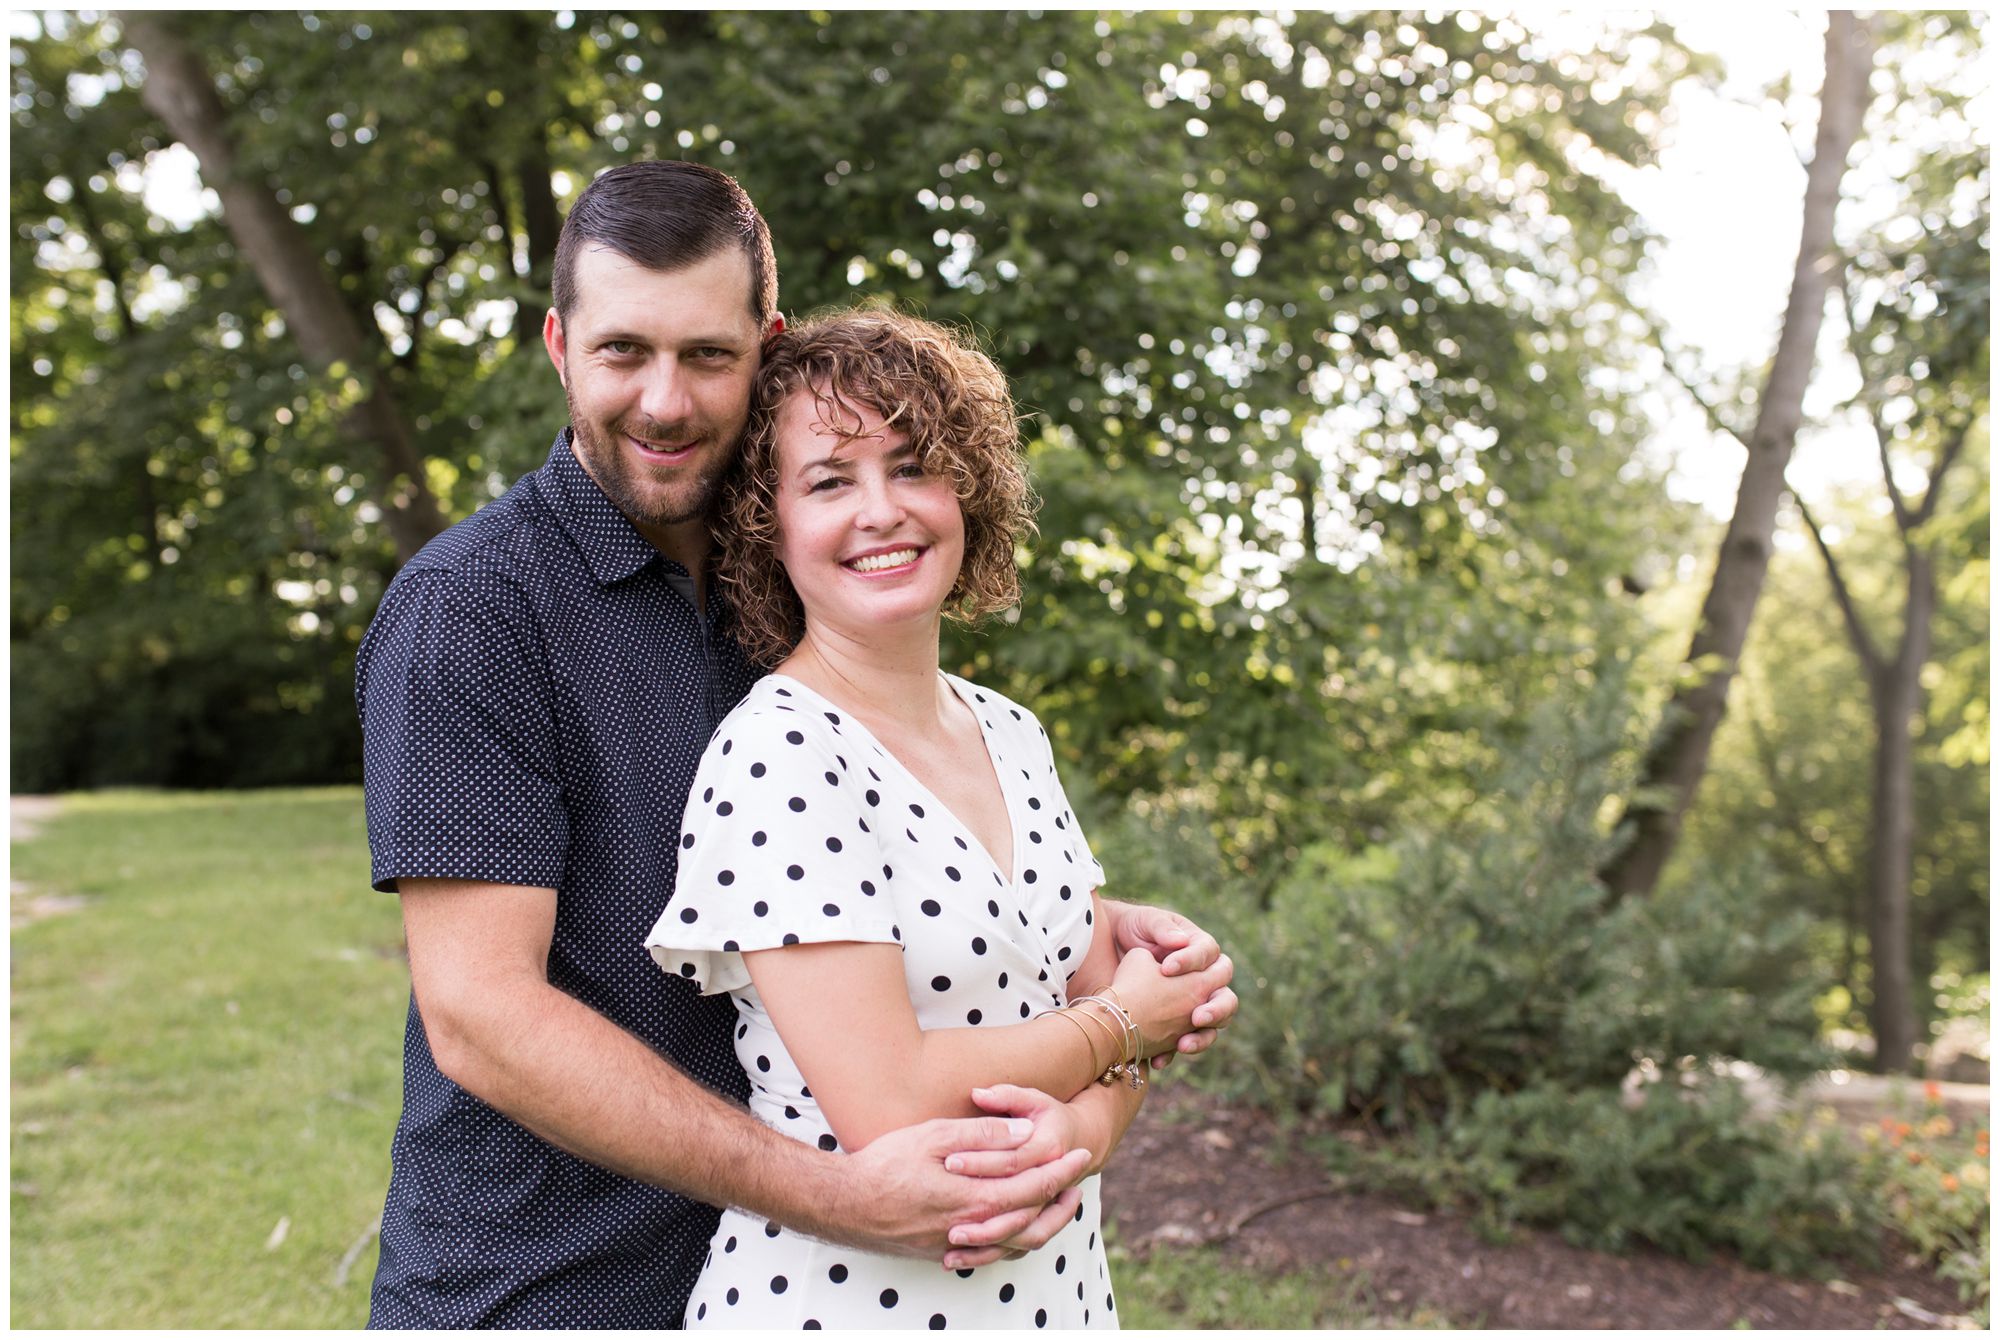 groom wraps arms around bride during Charley Creek Gardens engagement session in Wabash, Indiana